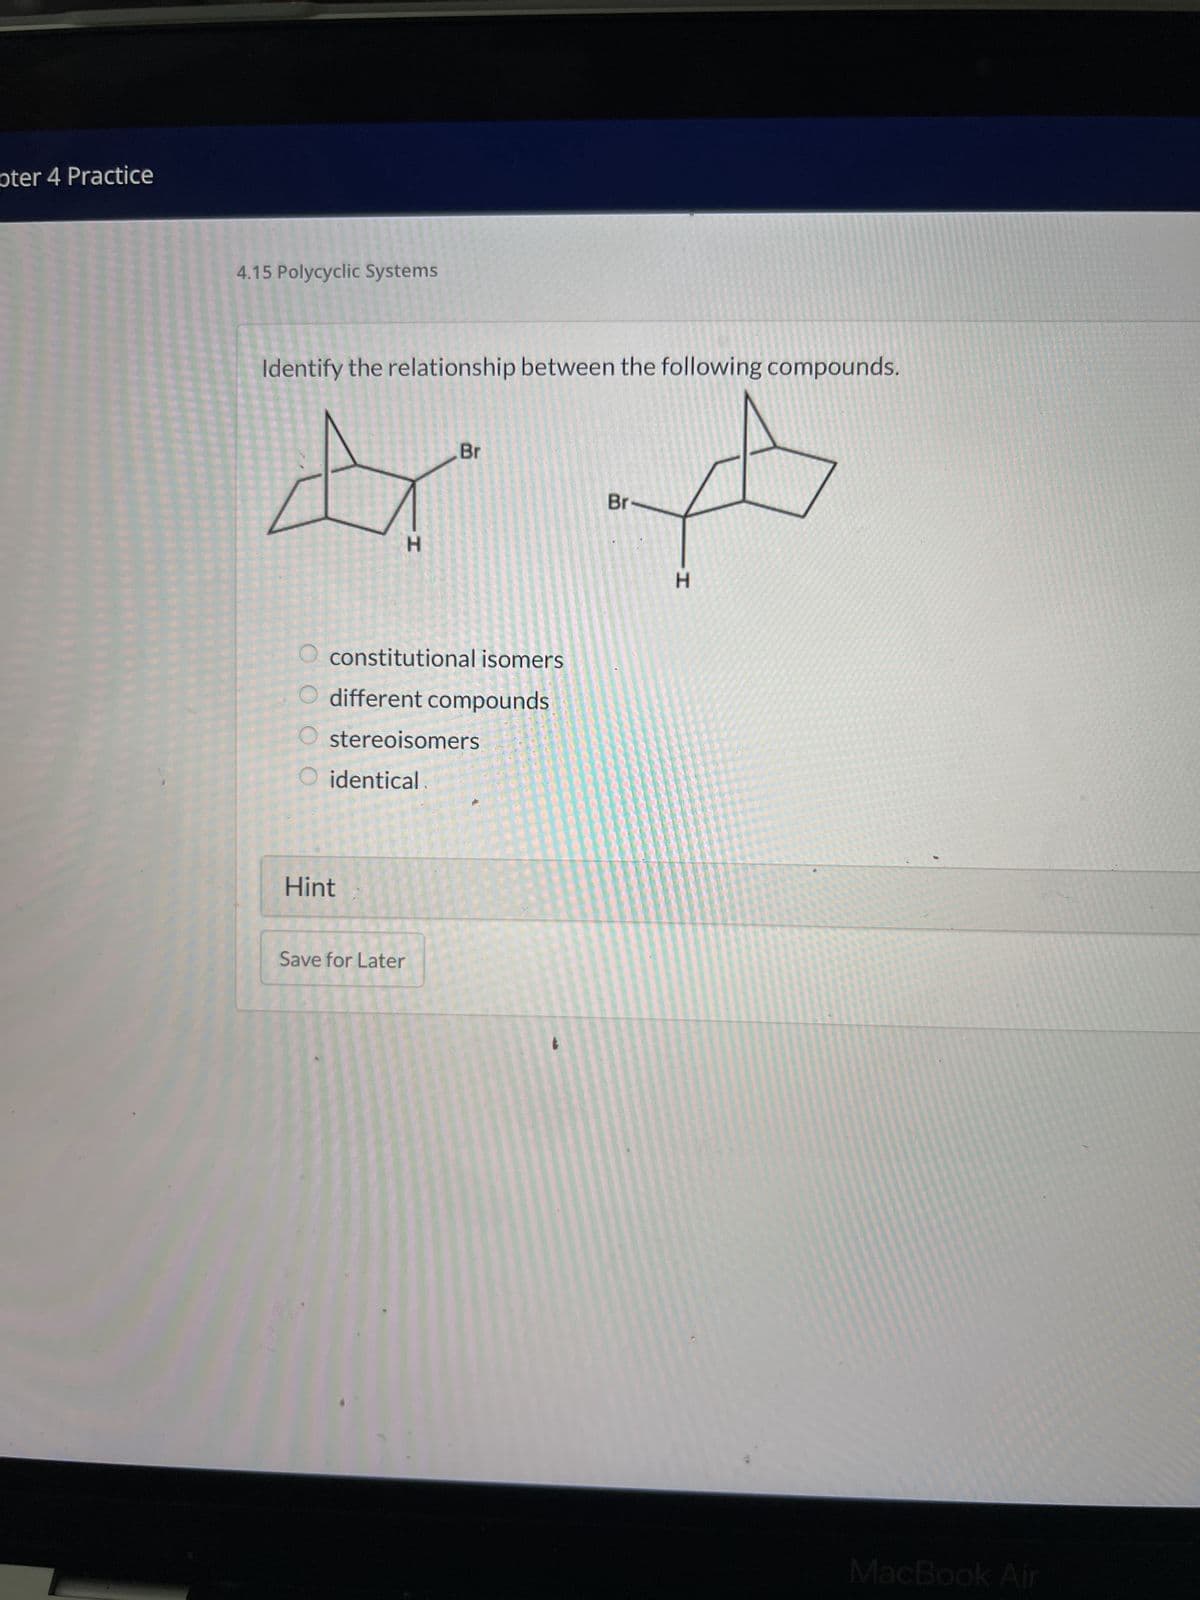 pter 4 Practice
4.15 Polycyclic Systems
Identify the relationship between the following compounds.
& A
Br
H
H
constitutional isomers
O different compounds
O stereoisomers
O identical
Hint
Br
Save for Later
MacBook Air